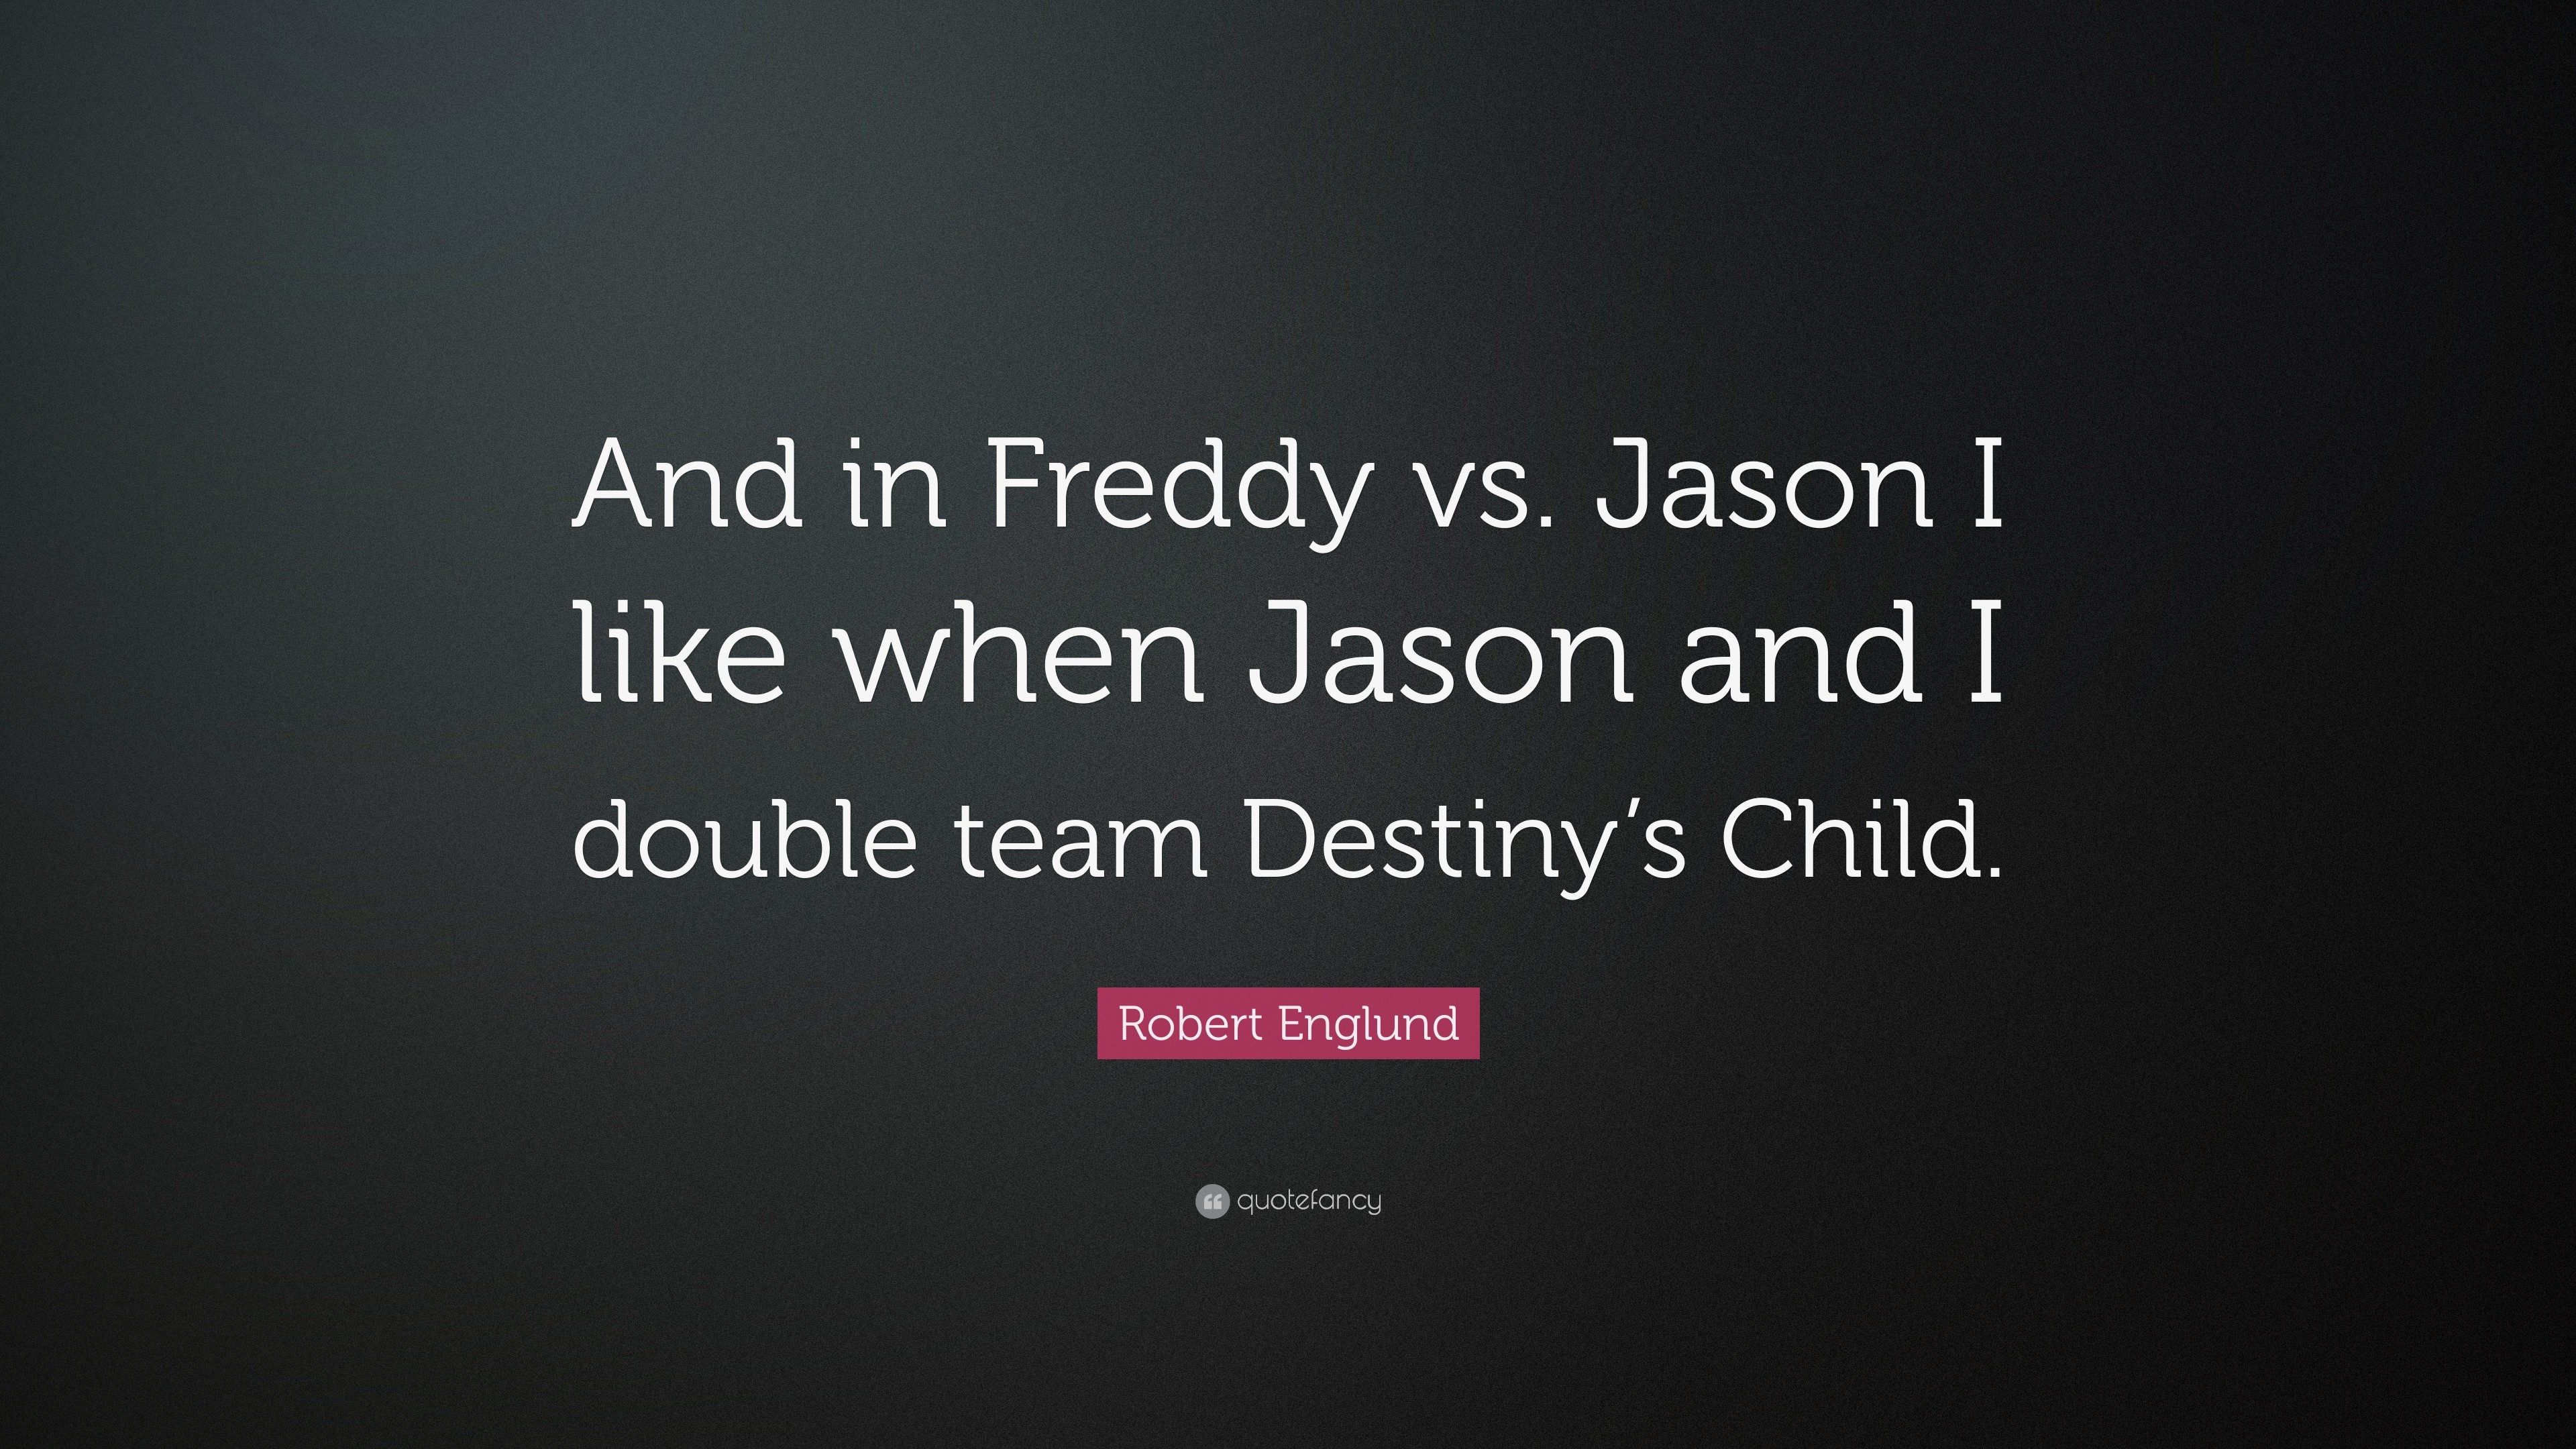 3840x2160 Robert Englund Quote: “And in Freddy vs. Jason I like when Jason and